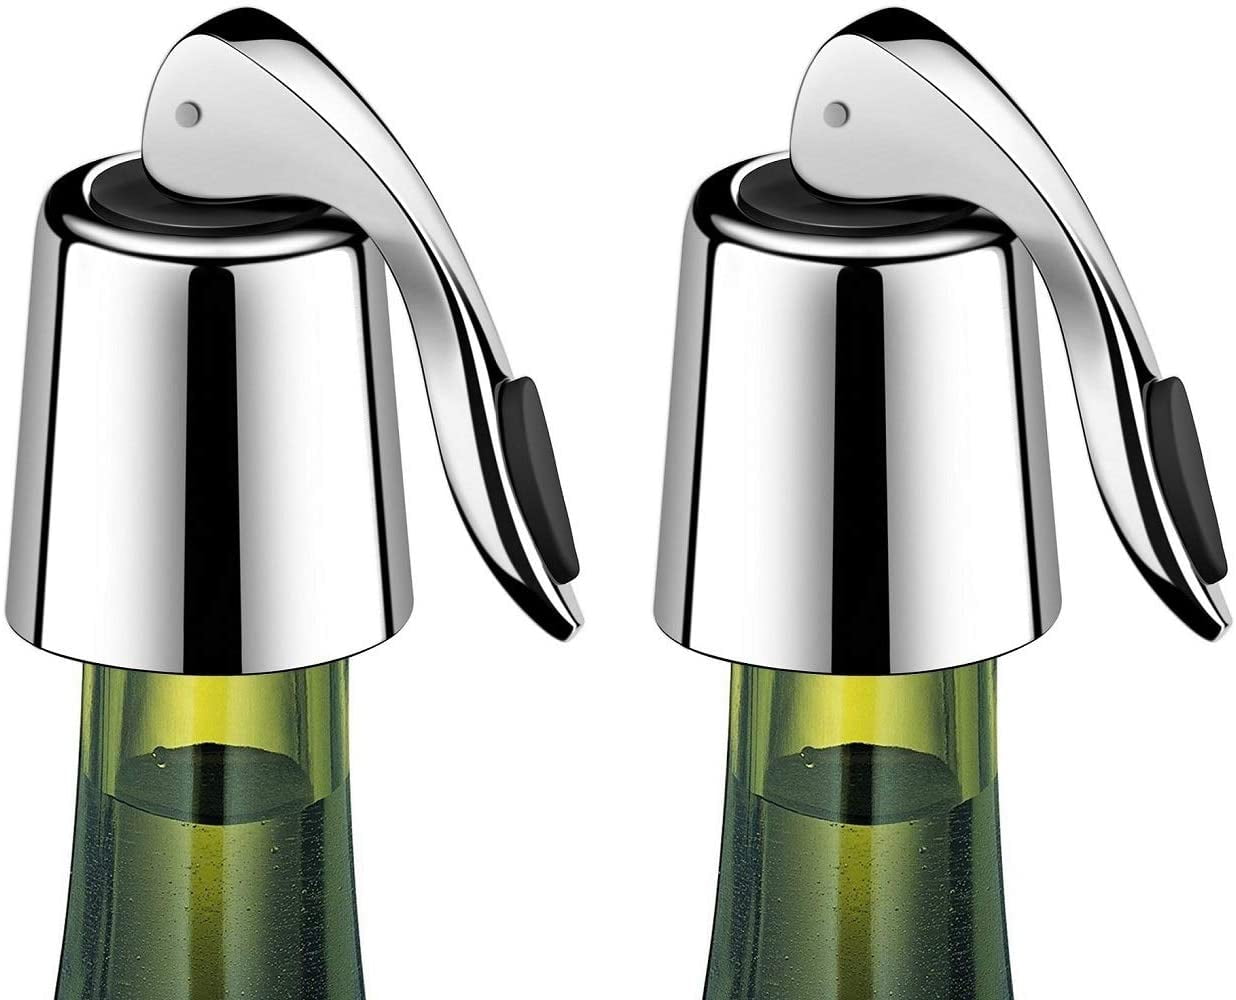 Details about   Stainless Steel Champagne Stopper Sparkling Red Wine Bottle Sealer Saver Tools 